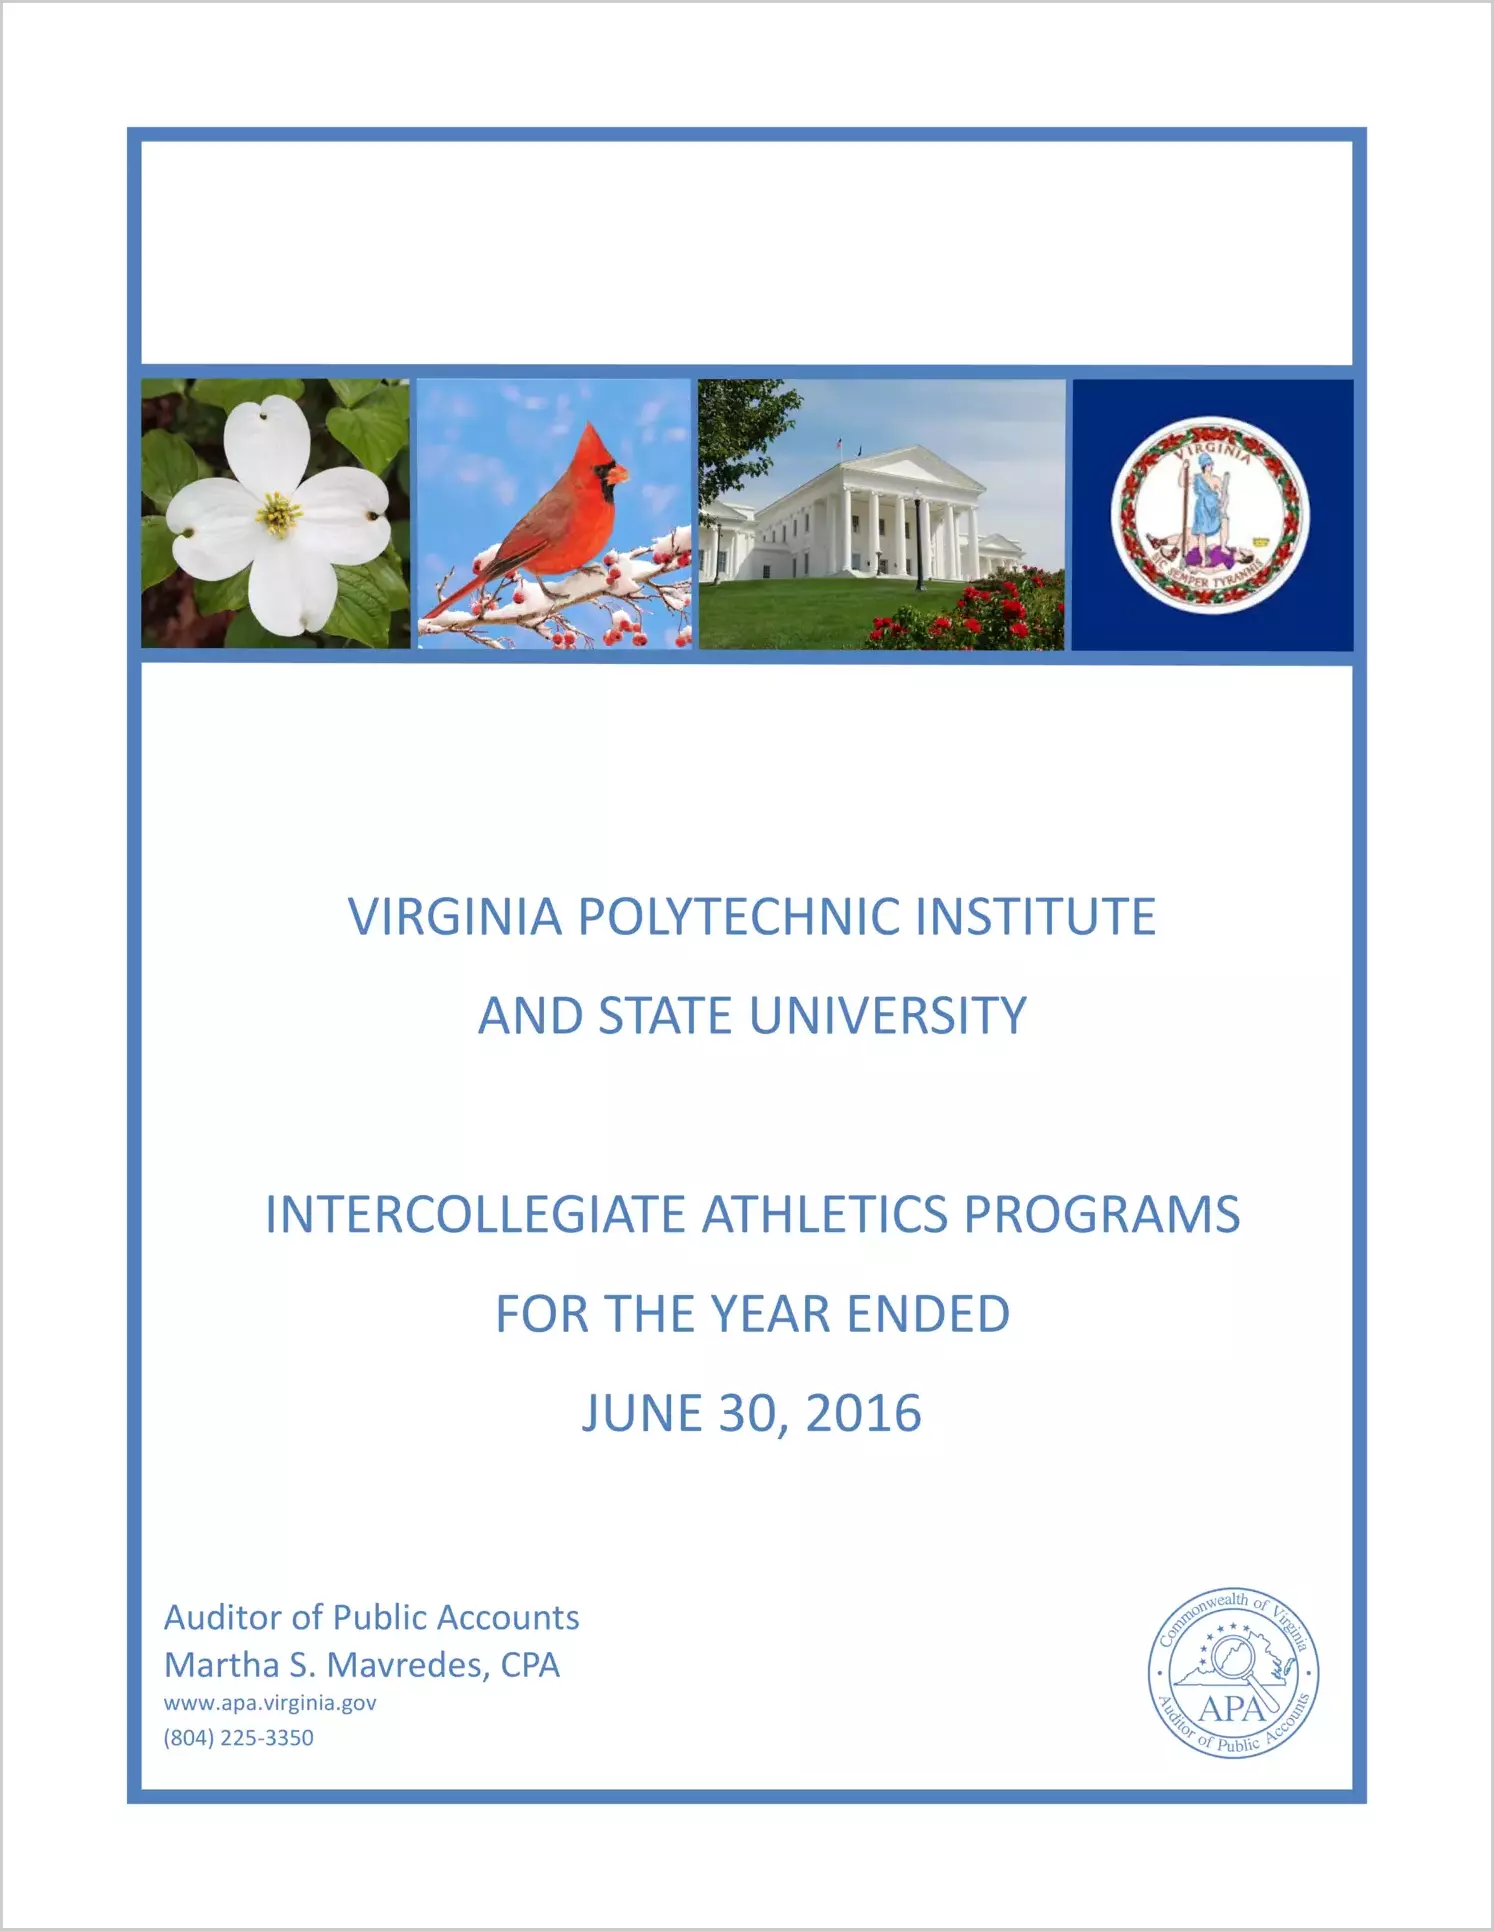 Virginia Polytechnic Institute and State University Intercollegiate Athletics Programs for the year ended June 30, 2016